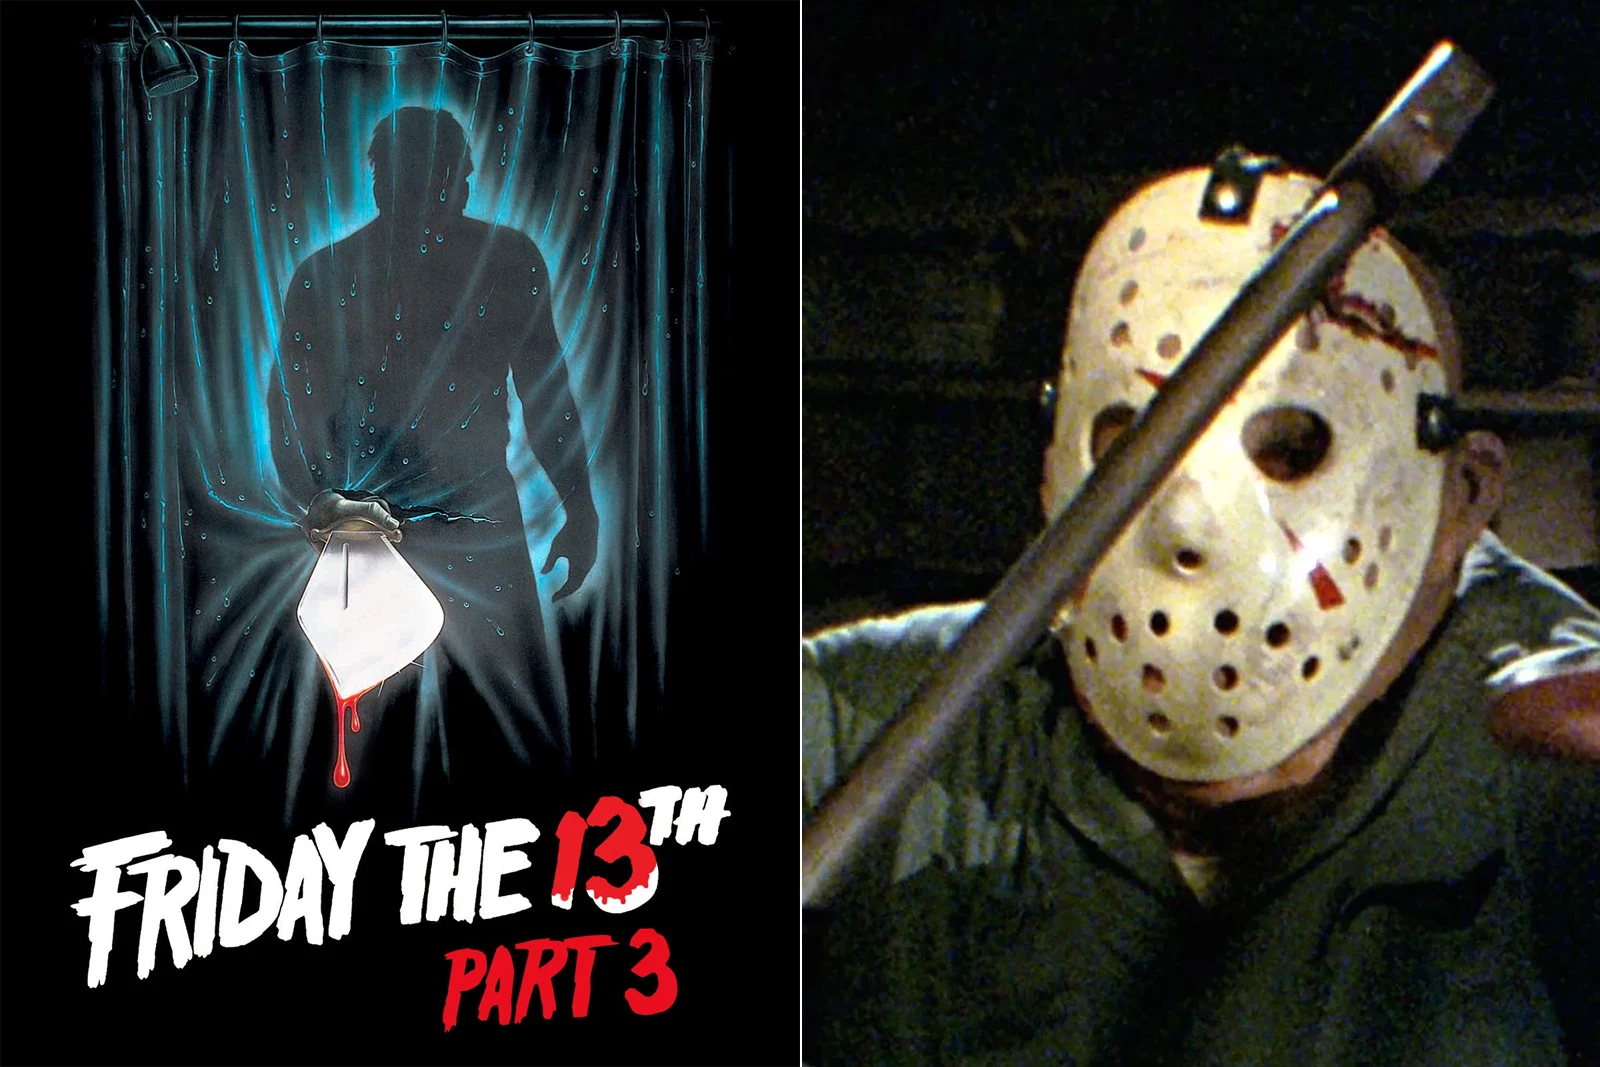 40 Years Ago: Jason Seals His Fate in 'Friday the 13th Part III'